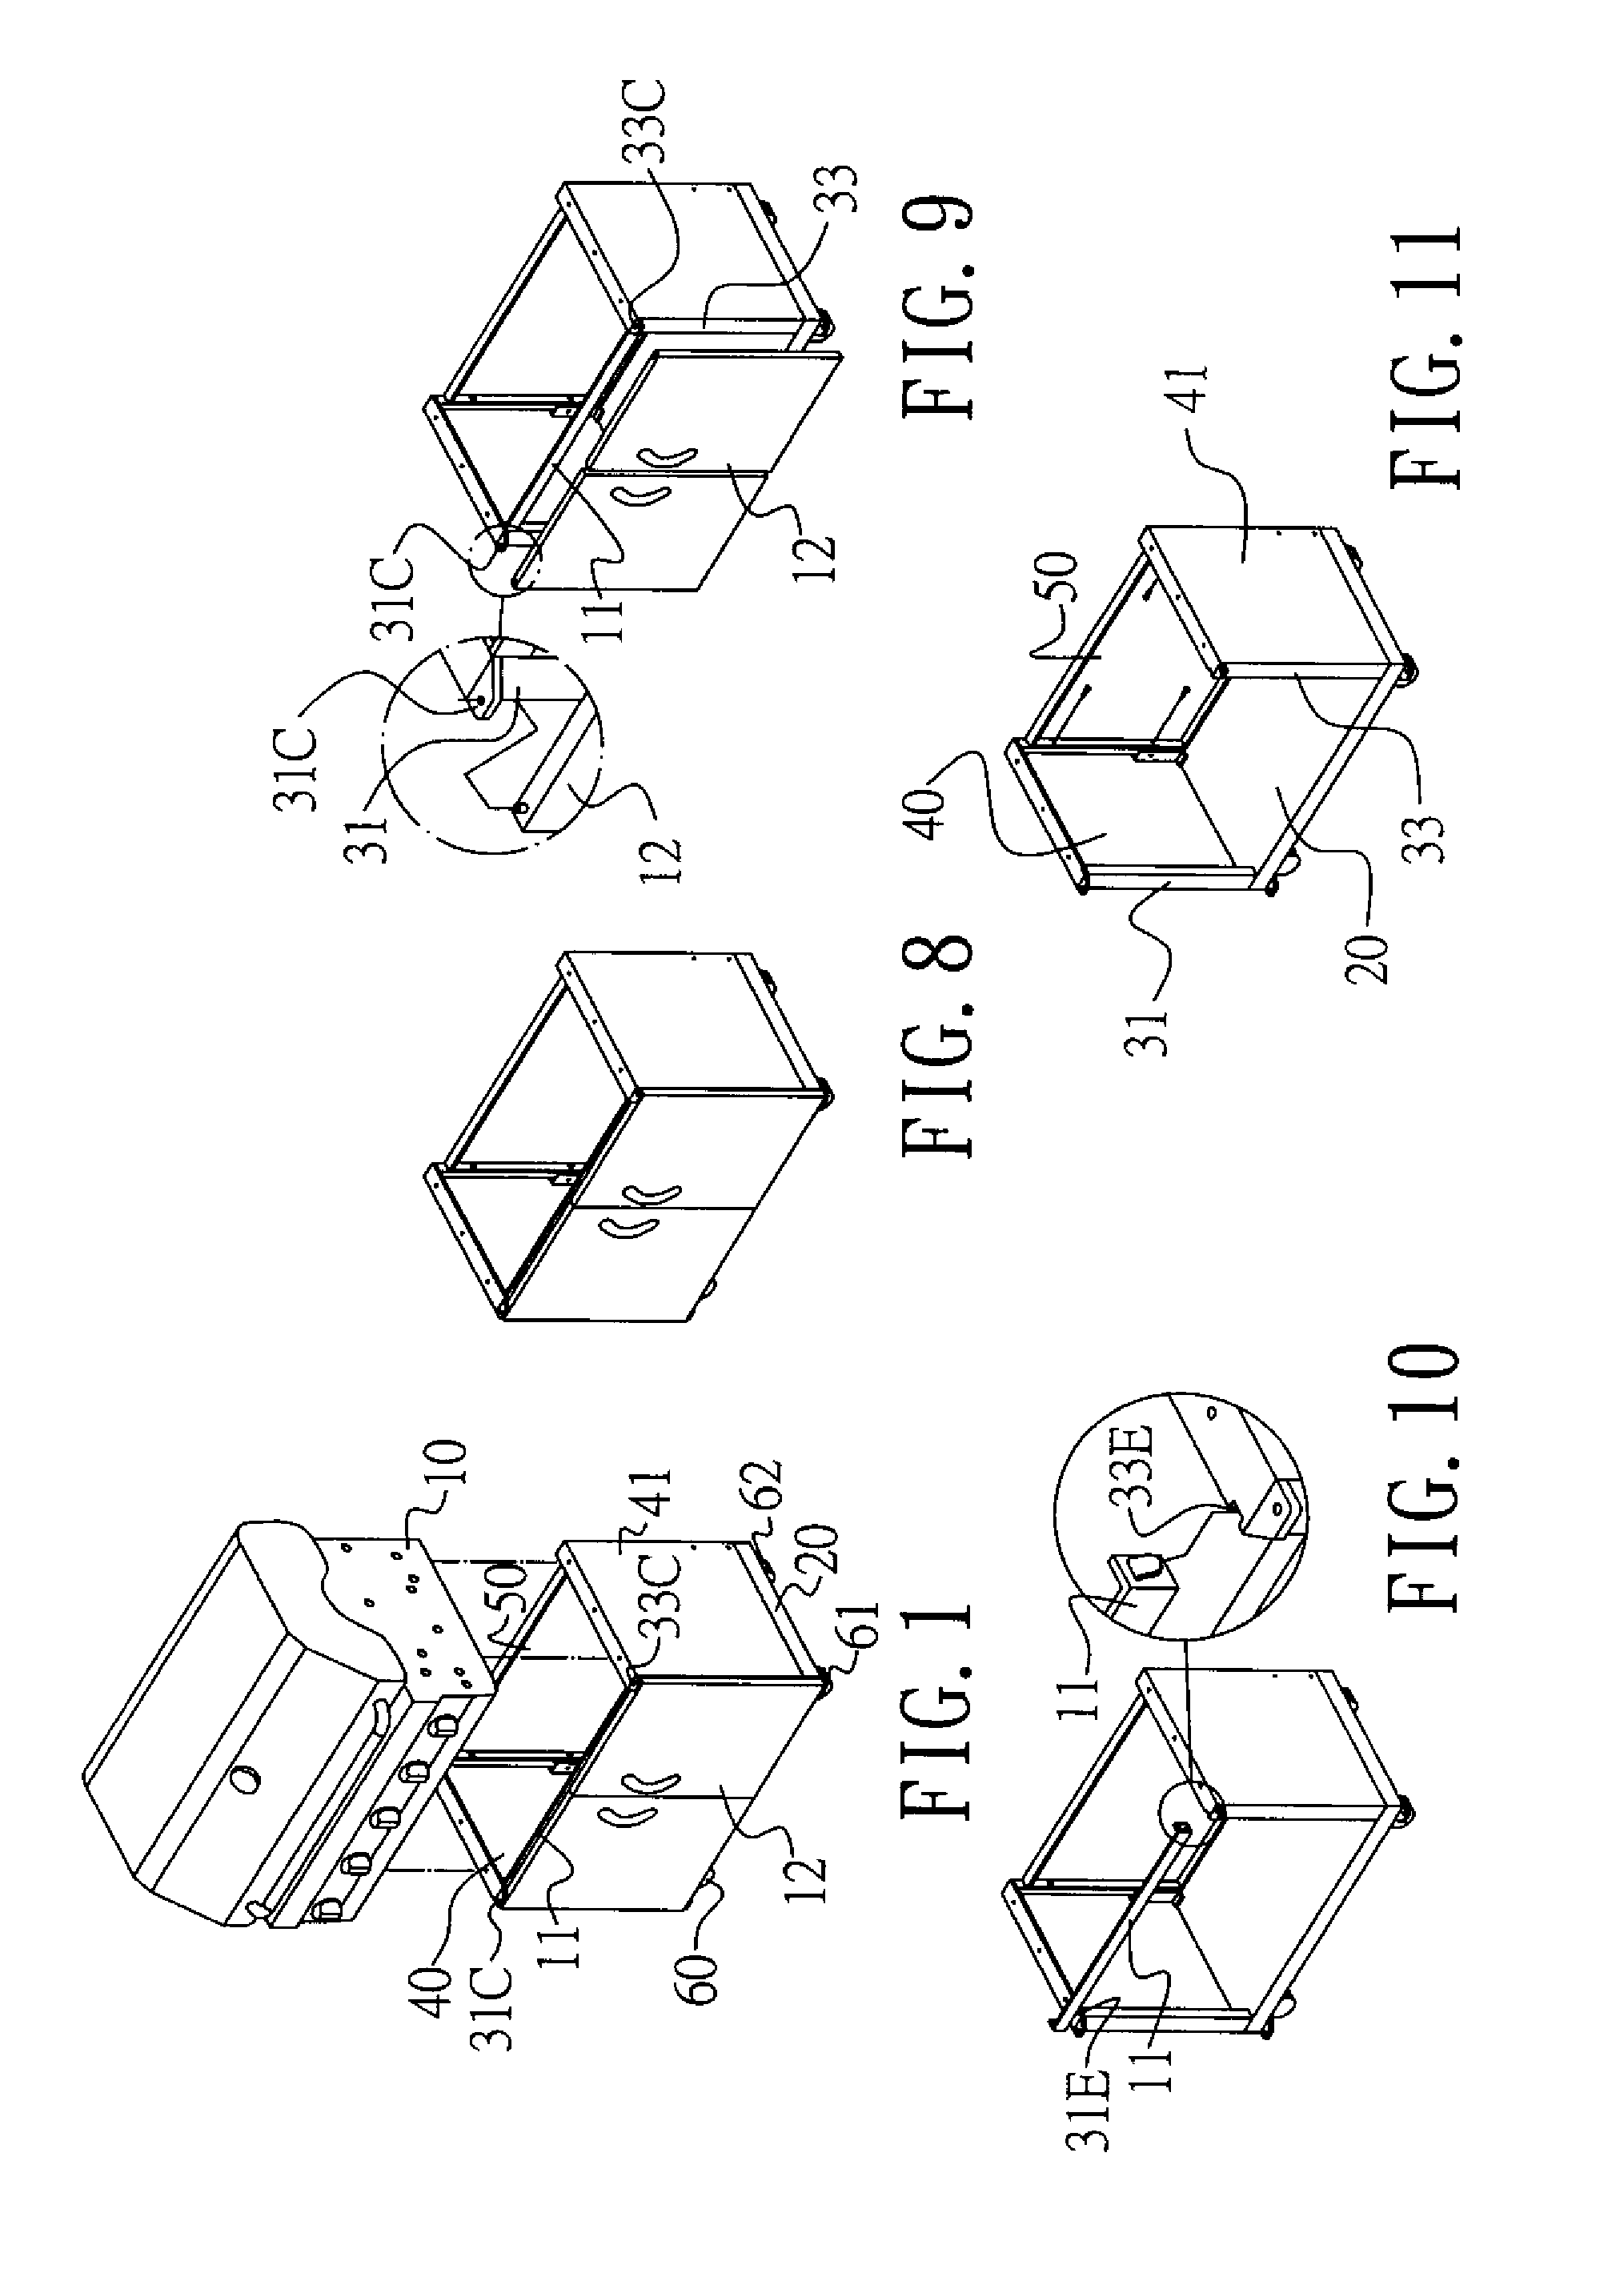 Barbecue device having foldable cart